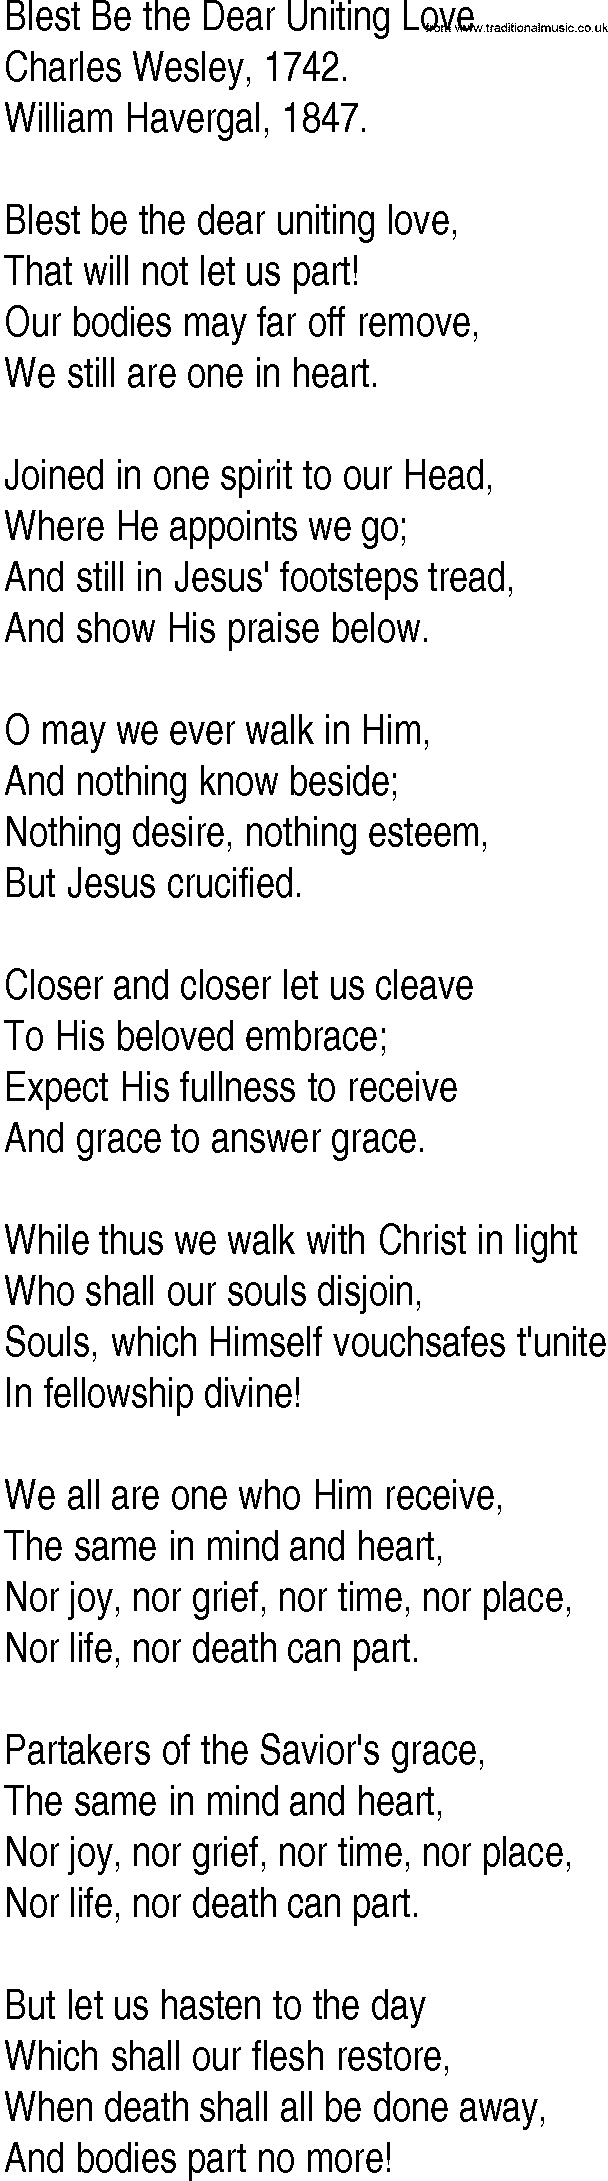 Hymn and Gospel Song: Blest Be the Dear Uniting Love by Charles Wesley lyrics